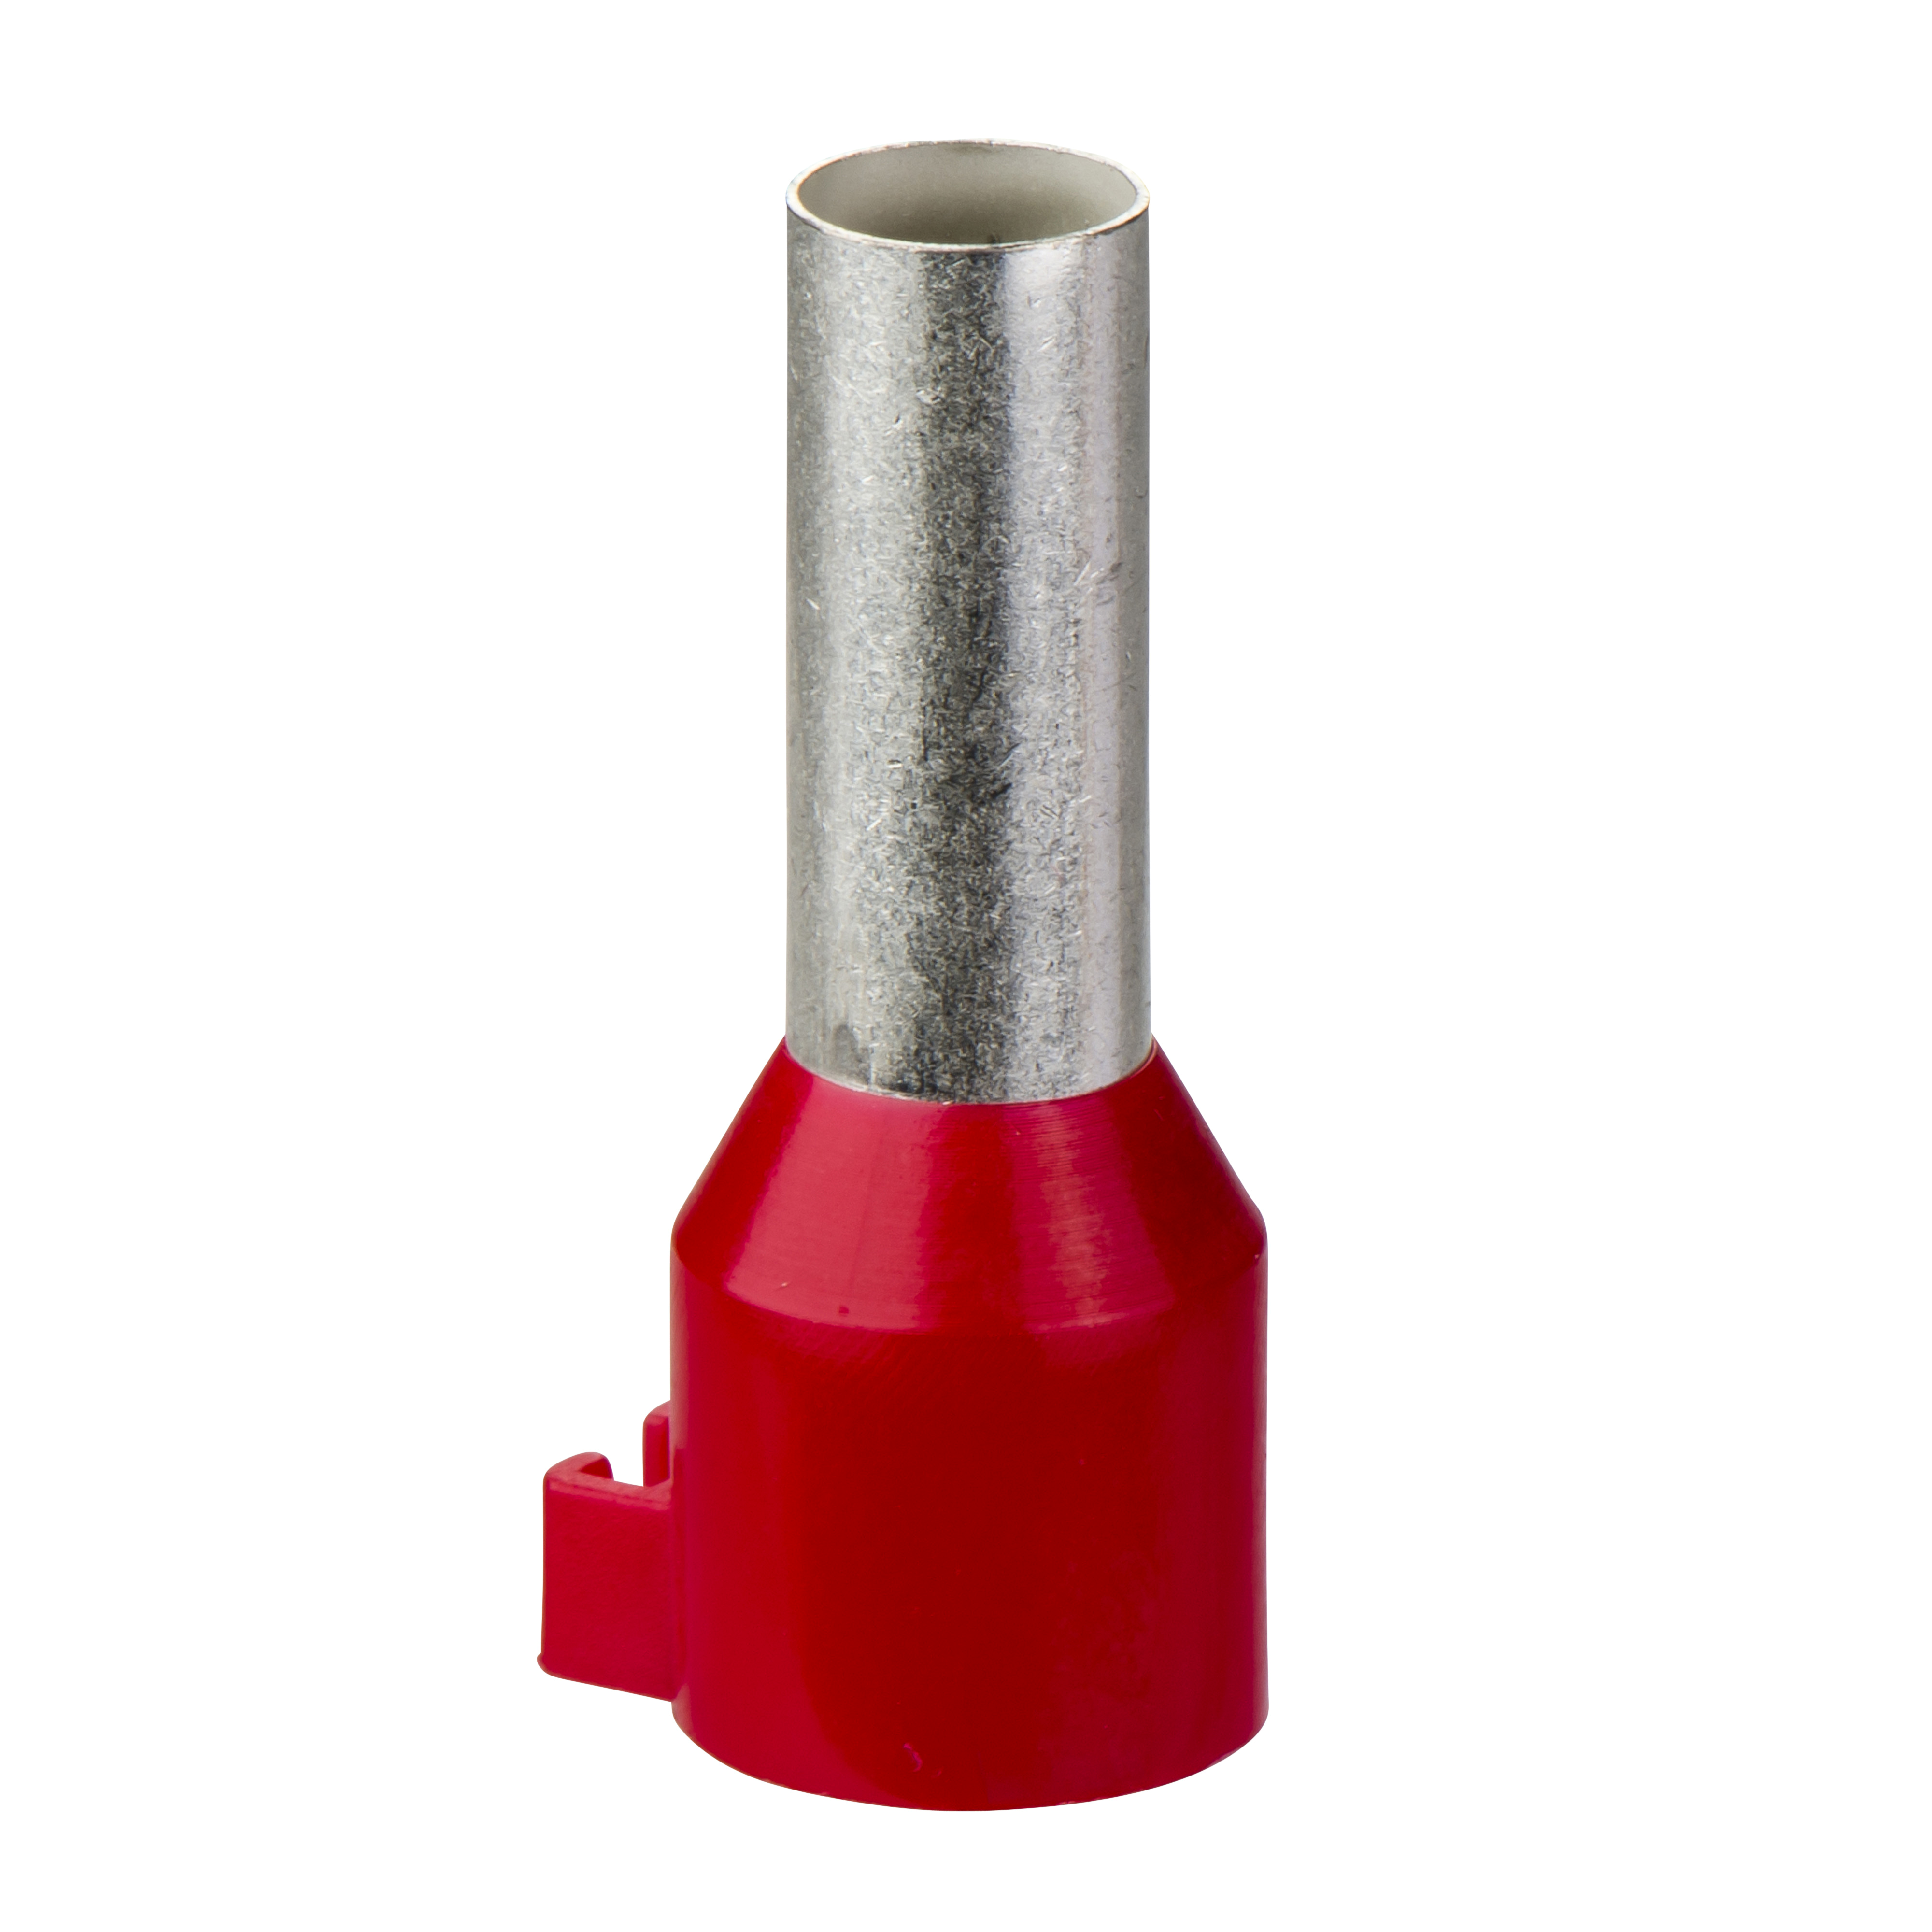 Cable end, Linergy TR cable ends, single conductor, red, 10mm², for insulated cable, medium size, 10 sets of 100